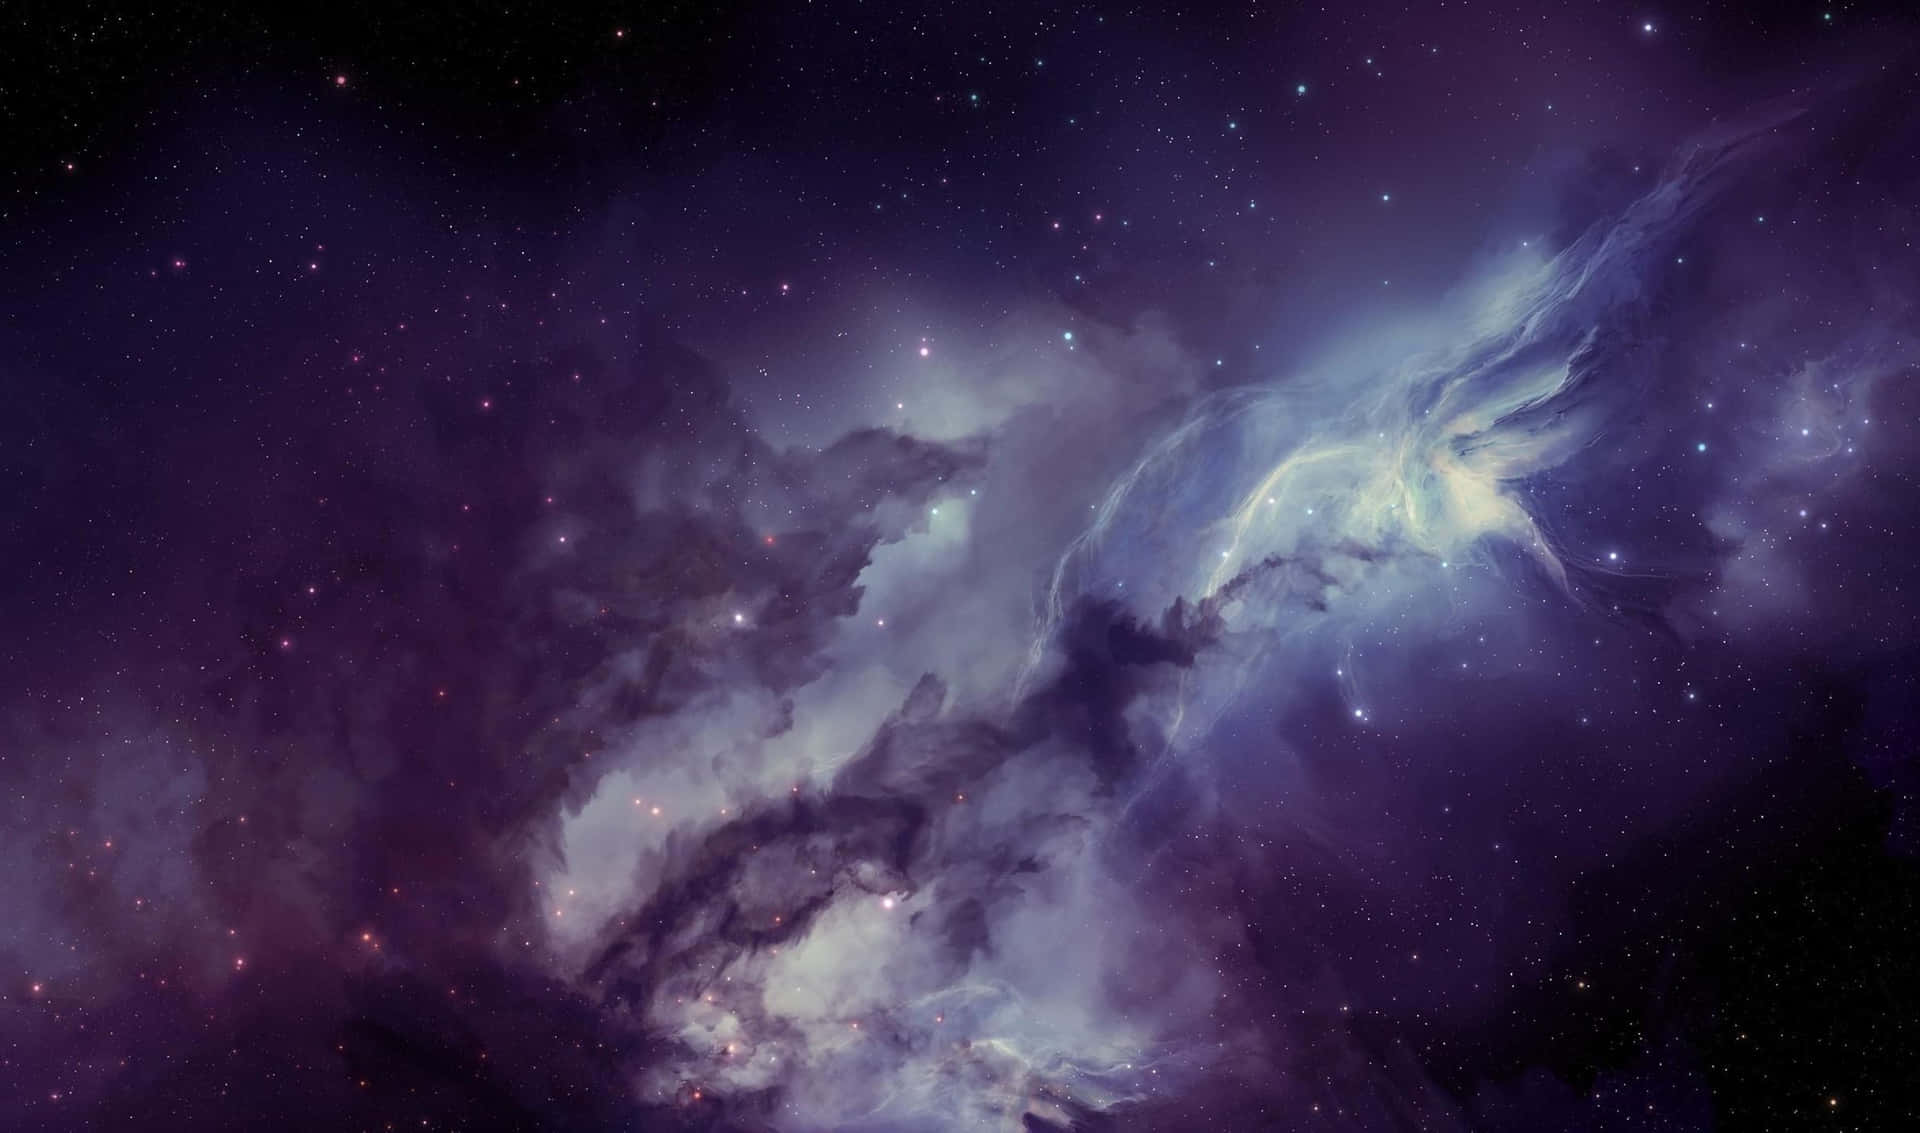 A Purple And Blue Space With Stars And Nebulas